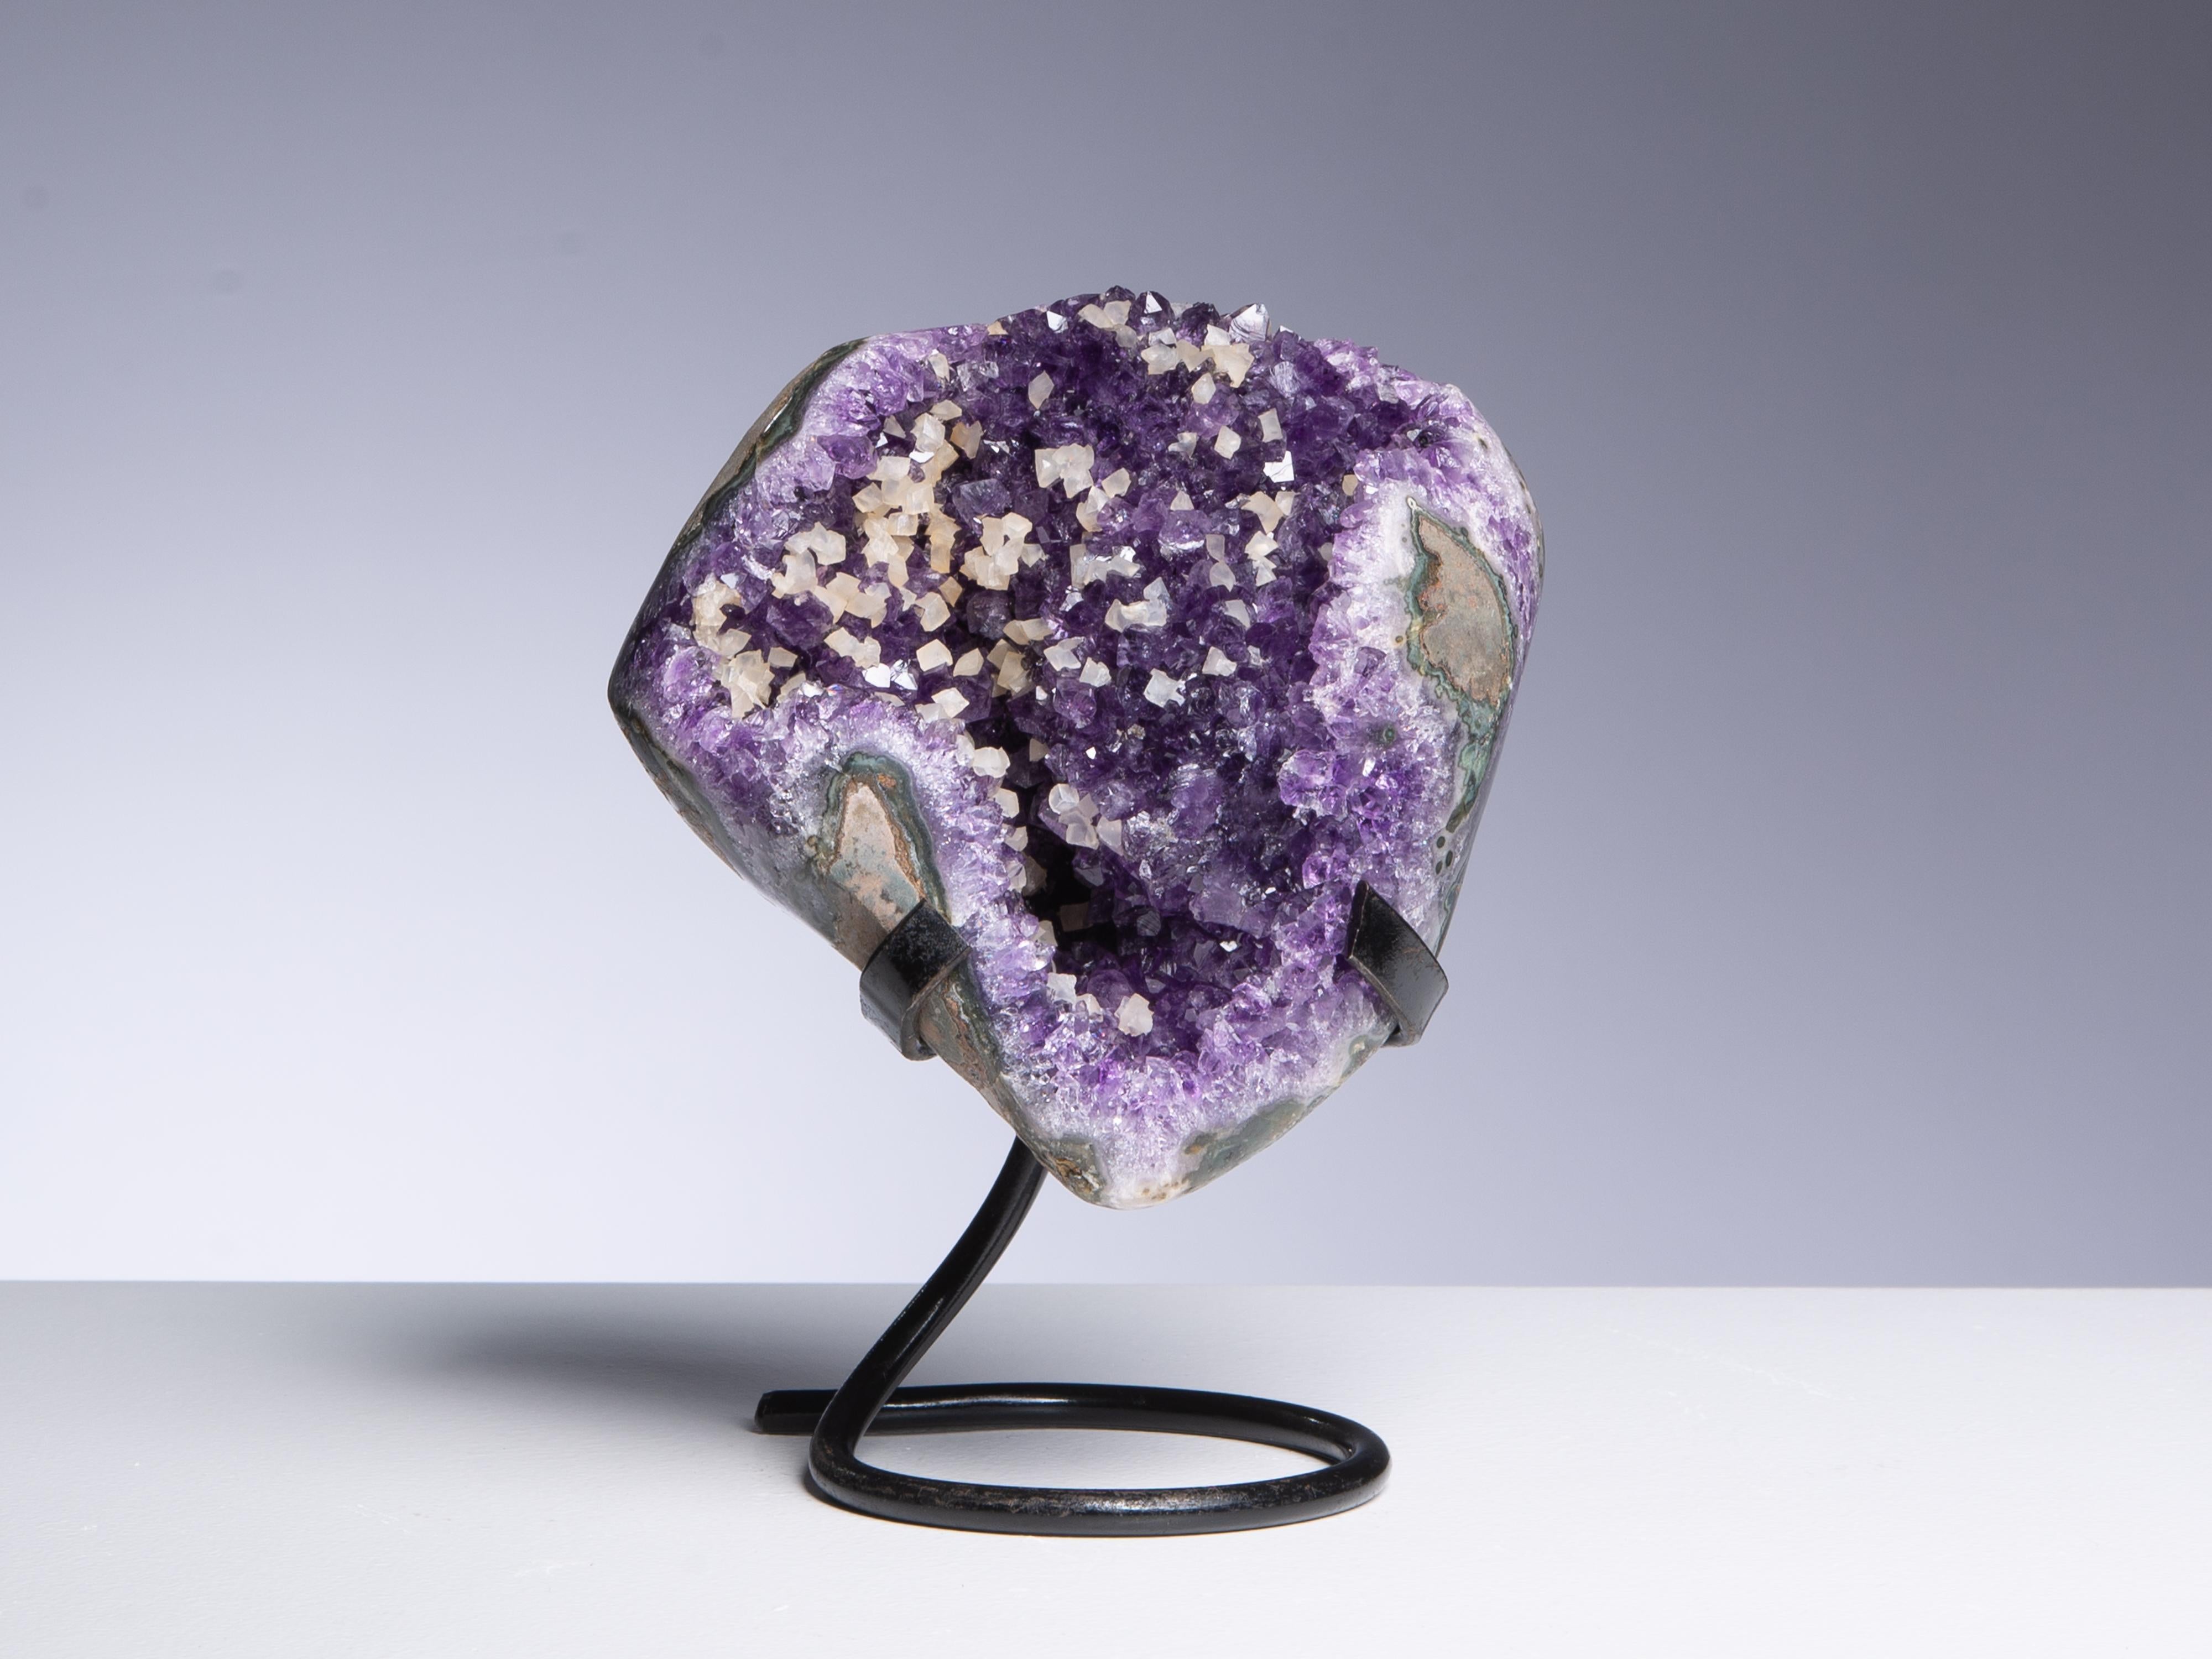 A small amethyst cluster with interesting sprinkling of creamy calcite crystals.
Polished at the edges.

This piece was legally and ethically sourced directly in the prestigious mines of Uruguay, South America. Uruguayan amethyst is internationally